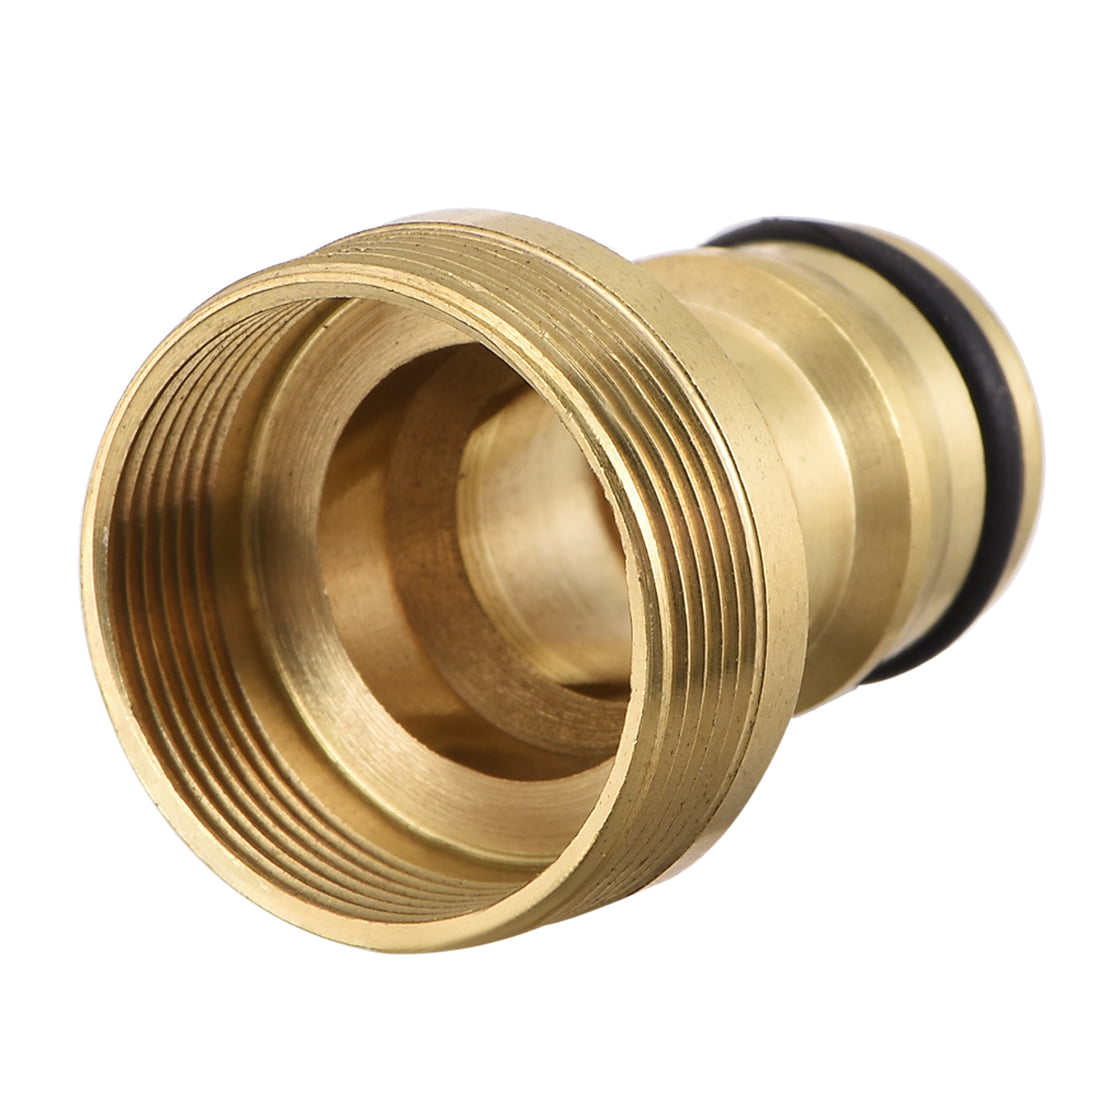 male to male water hose connector